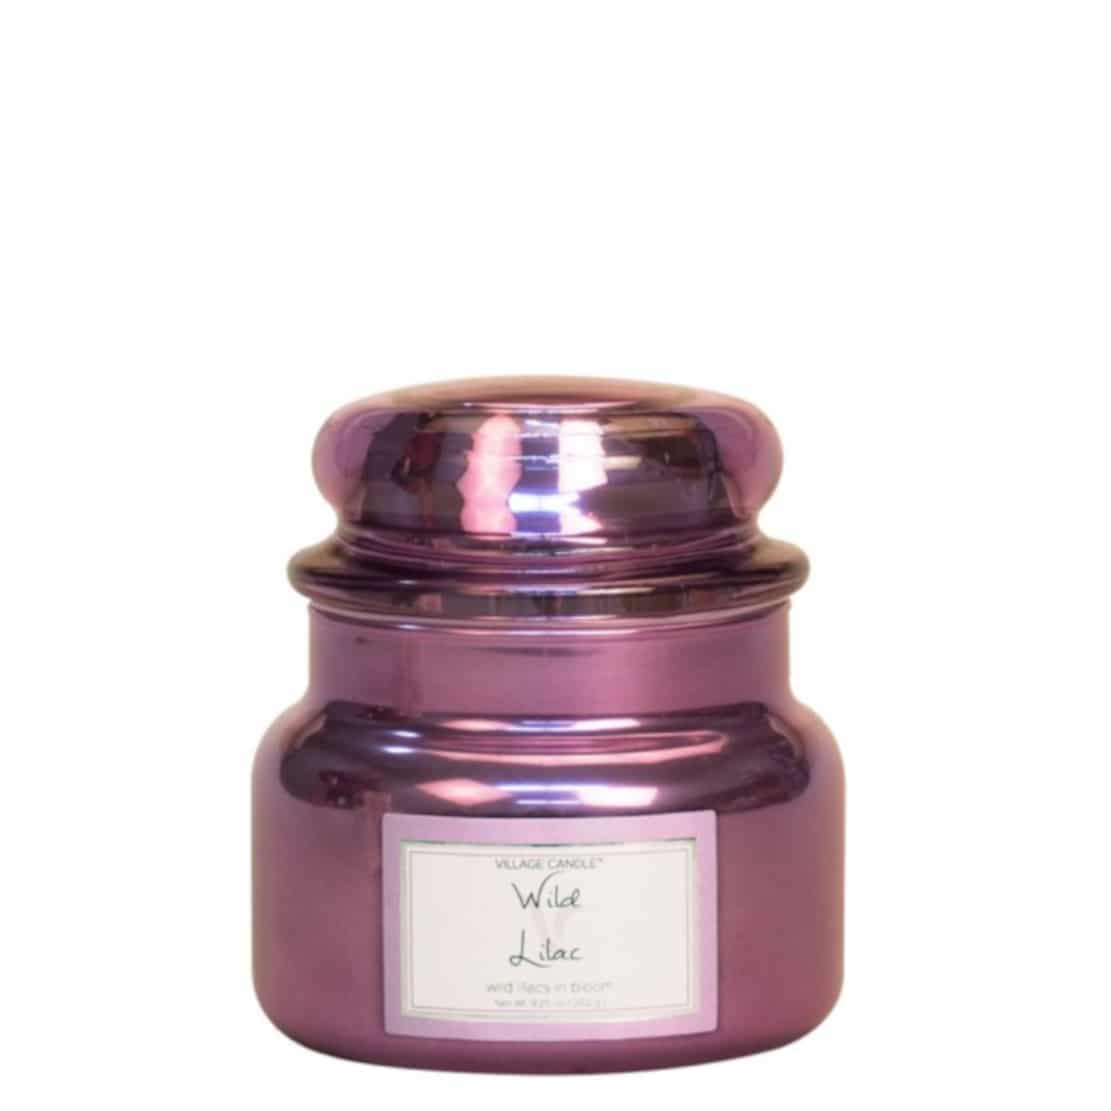 Village Candle Wild Lilac Small Jar 262g